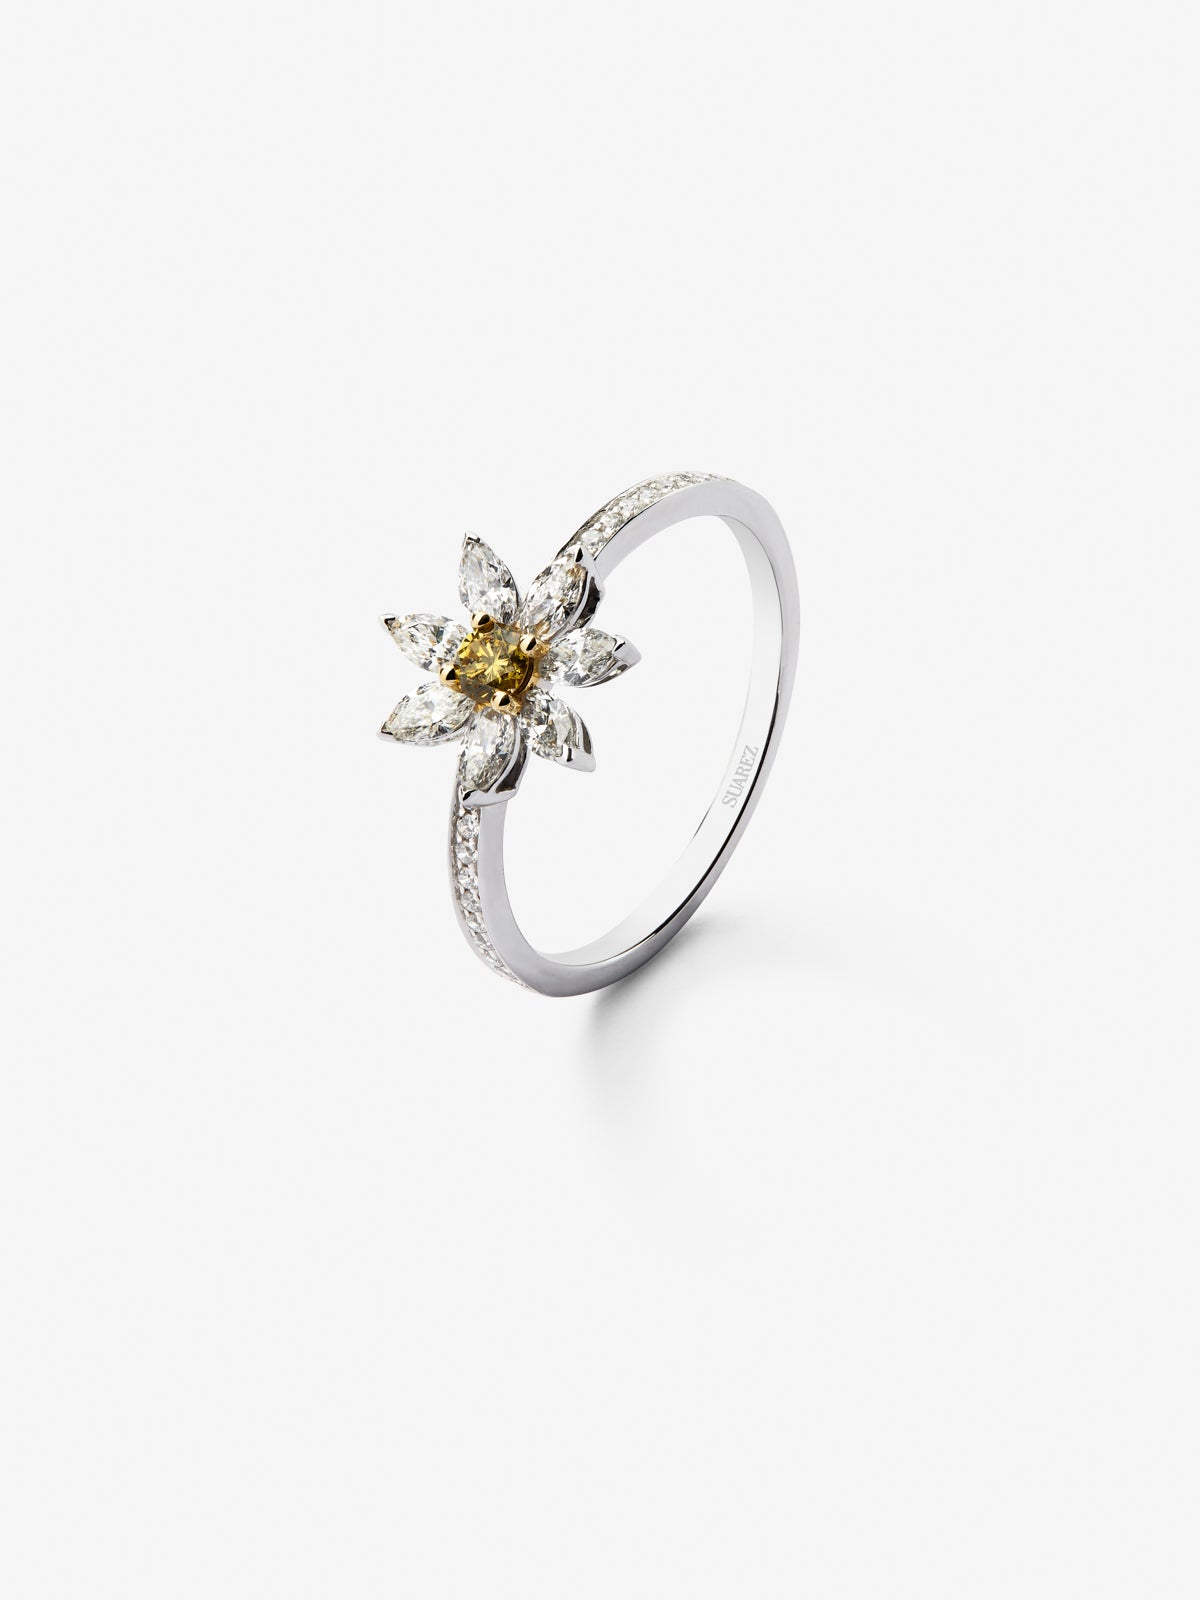 18K white gold ring with a brilliant-cut yellow diamond of 0.09 cts, 7 marquise-cut diamonds with a total of 0.43 cts and 20 brilliant-cut diamonds with a total of 0.07 cts